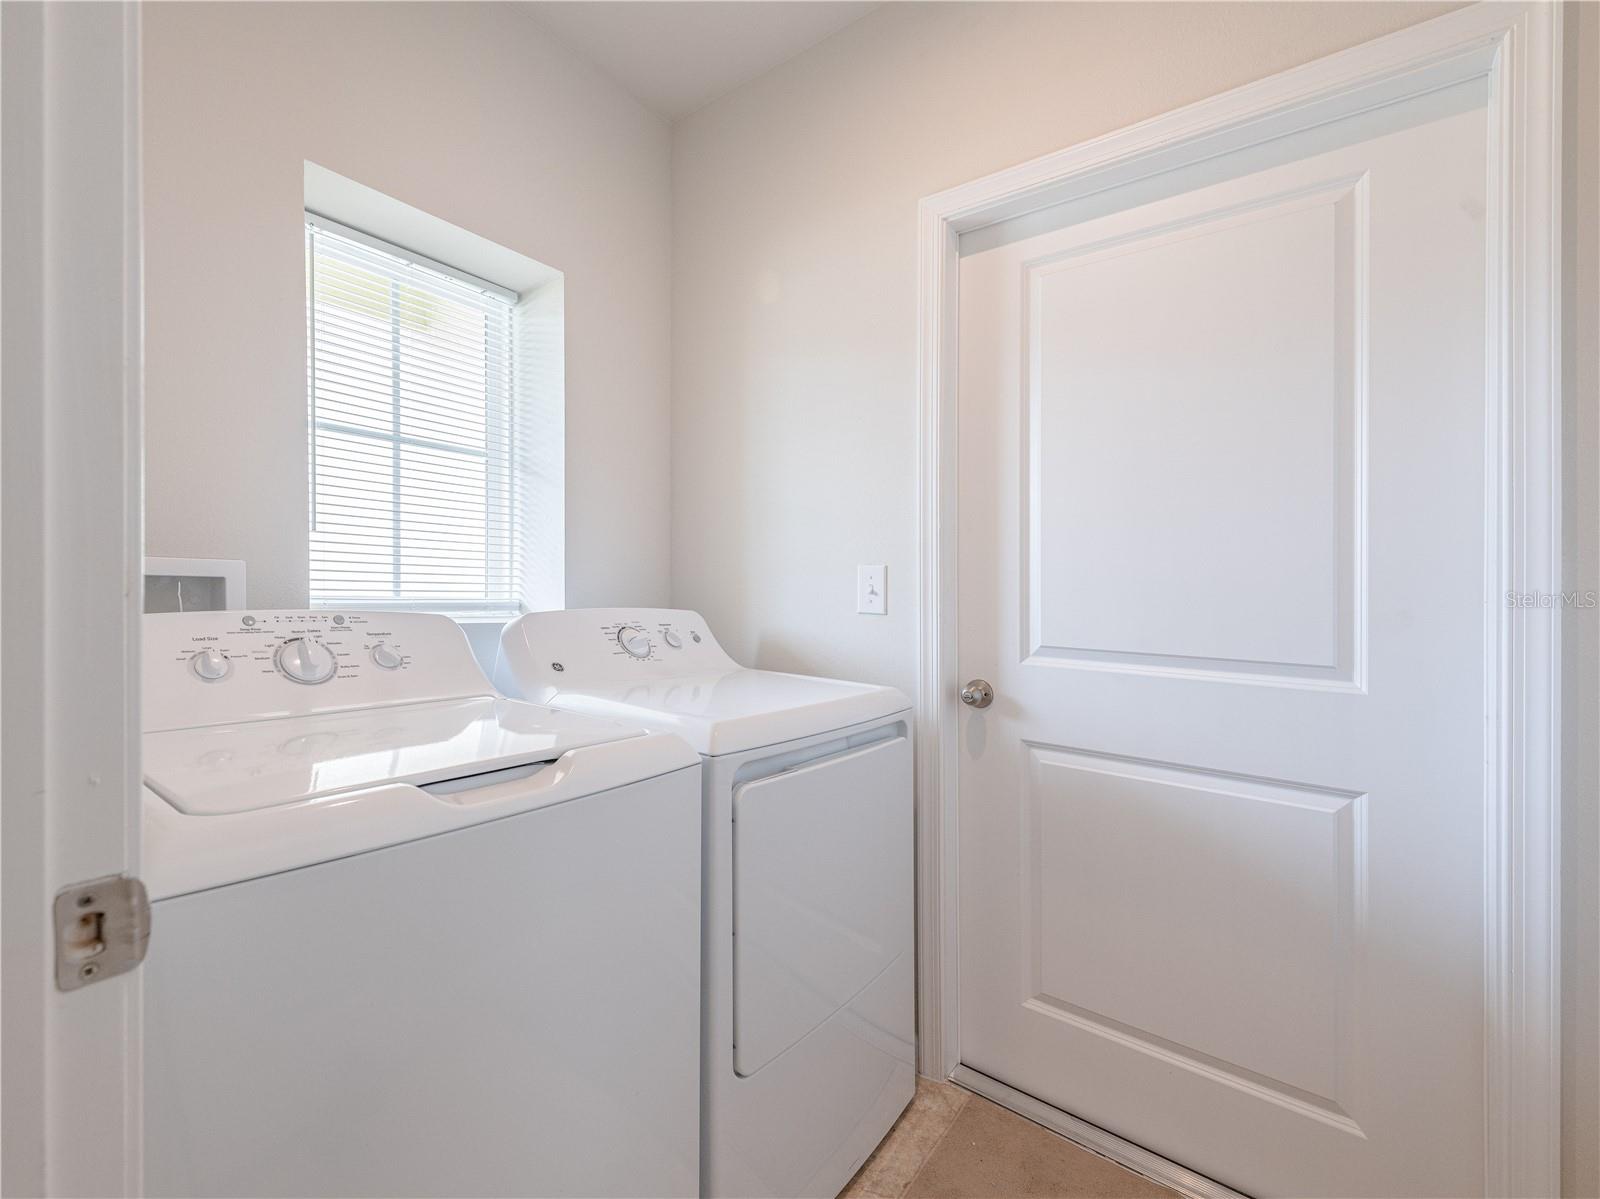 Interior laundry room with door leading to garage.